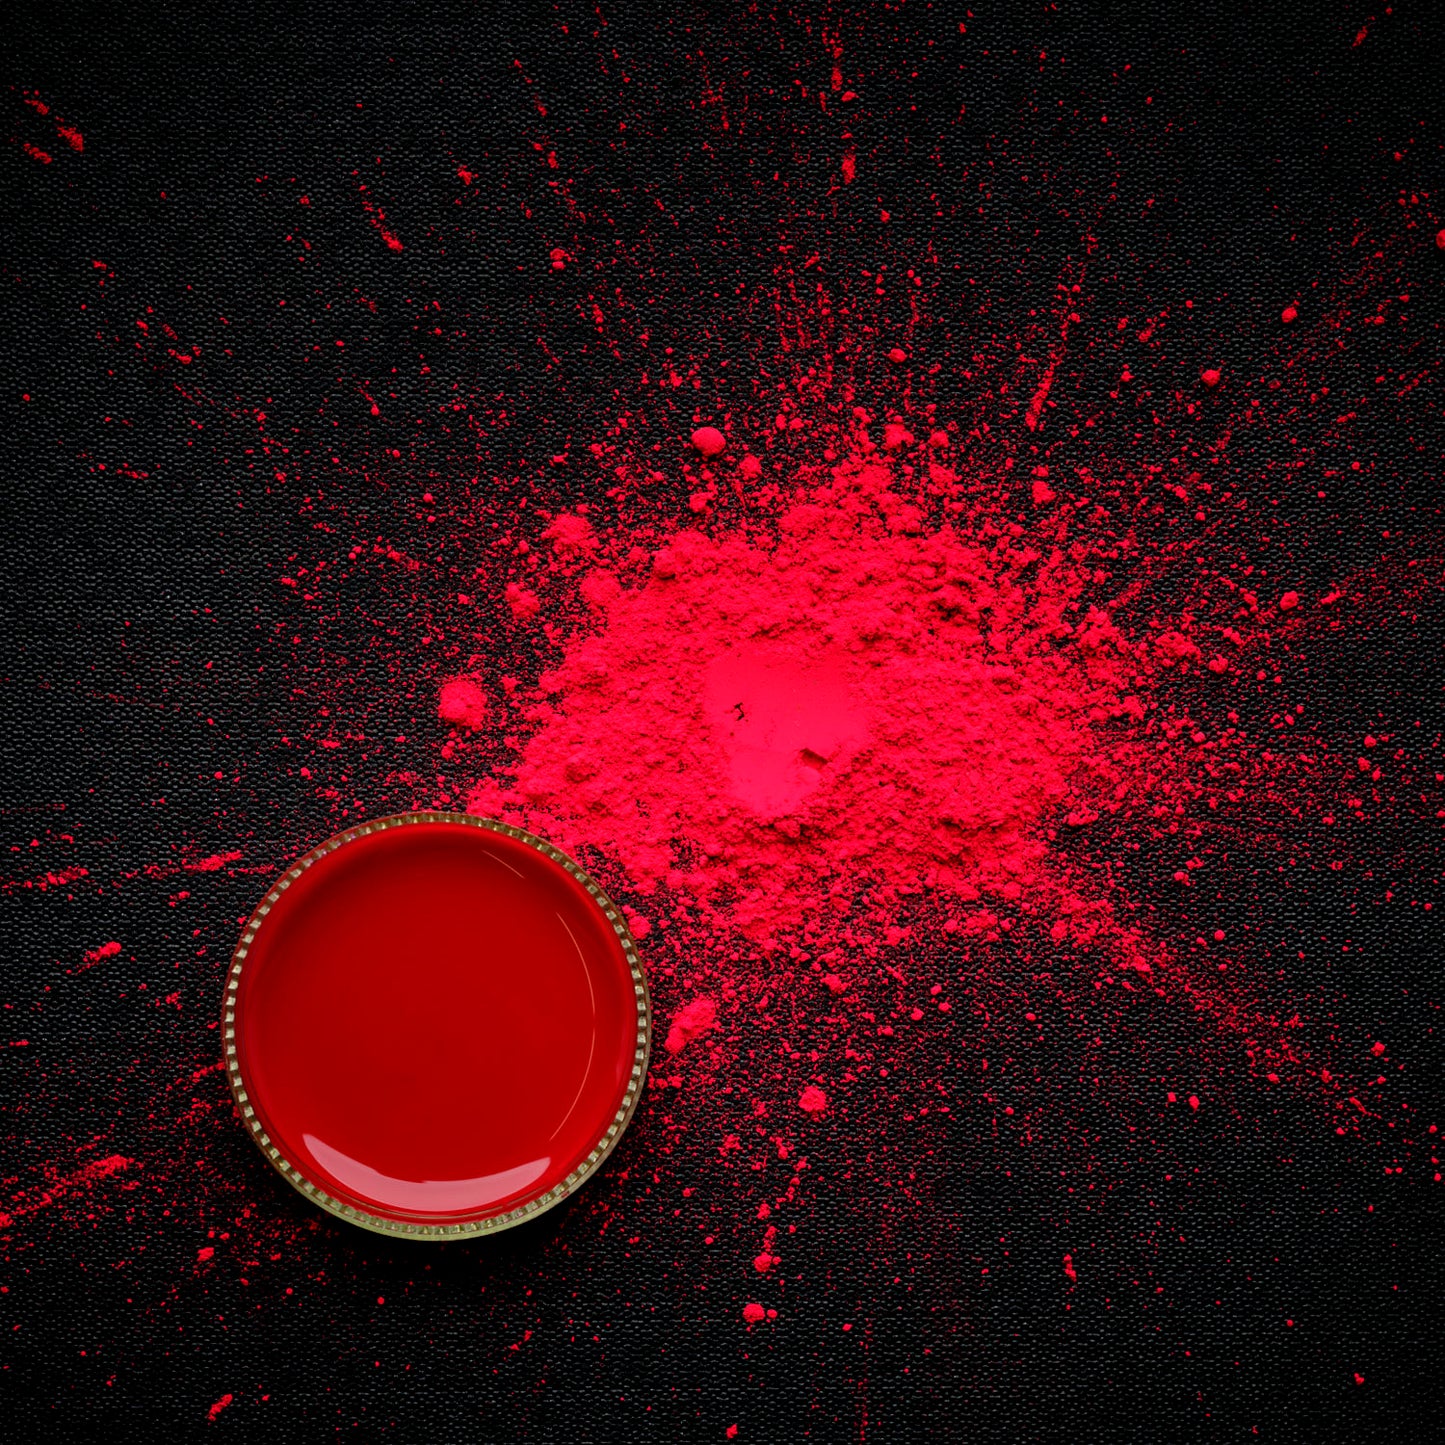 Really Red Pigment